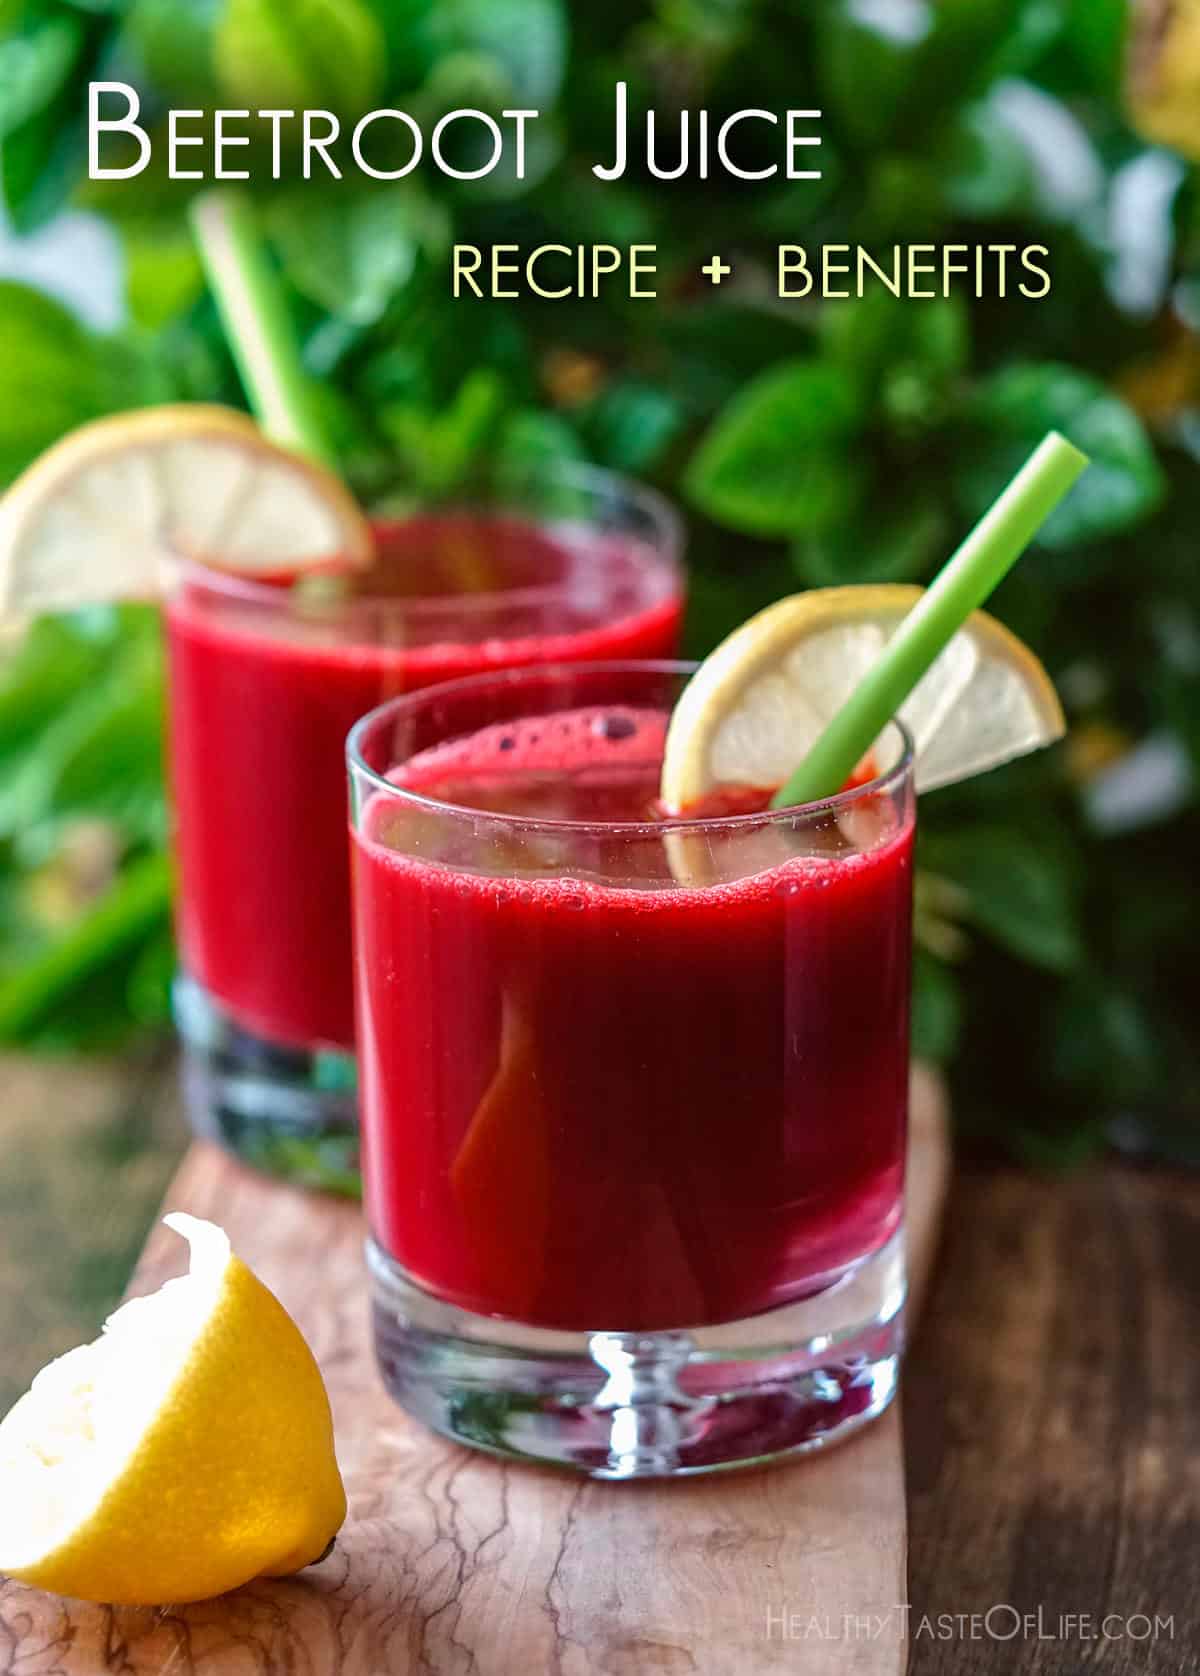 Picture showing fresh beetroot juice served in two glasses with straws and garnished with a slice of lemon.